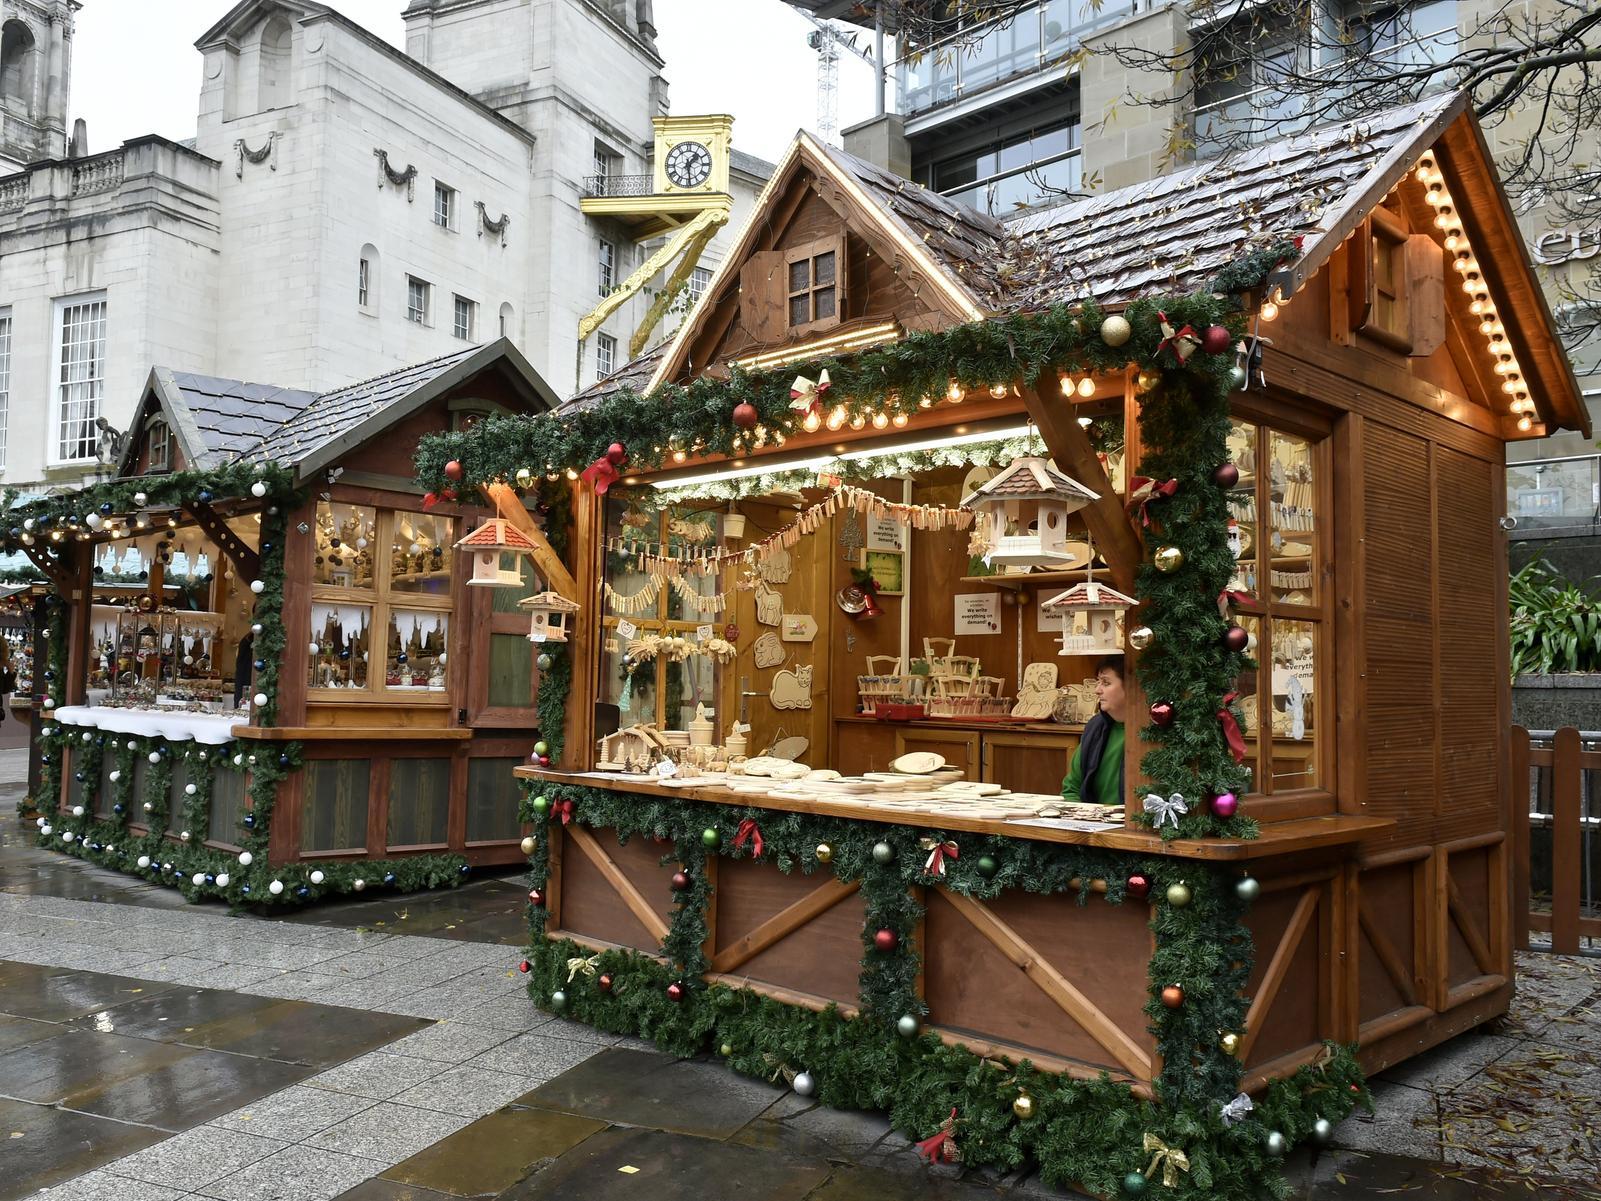 The Christkindelmarkt is once again boasting a wide range of festive stalls and authentic German food & drink